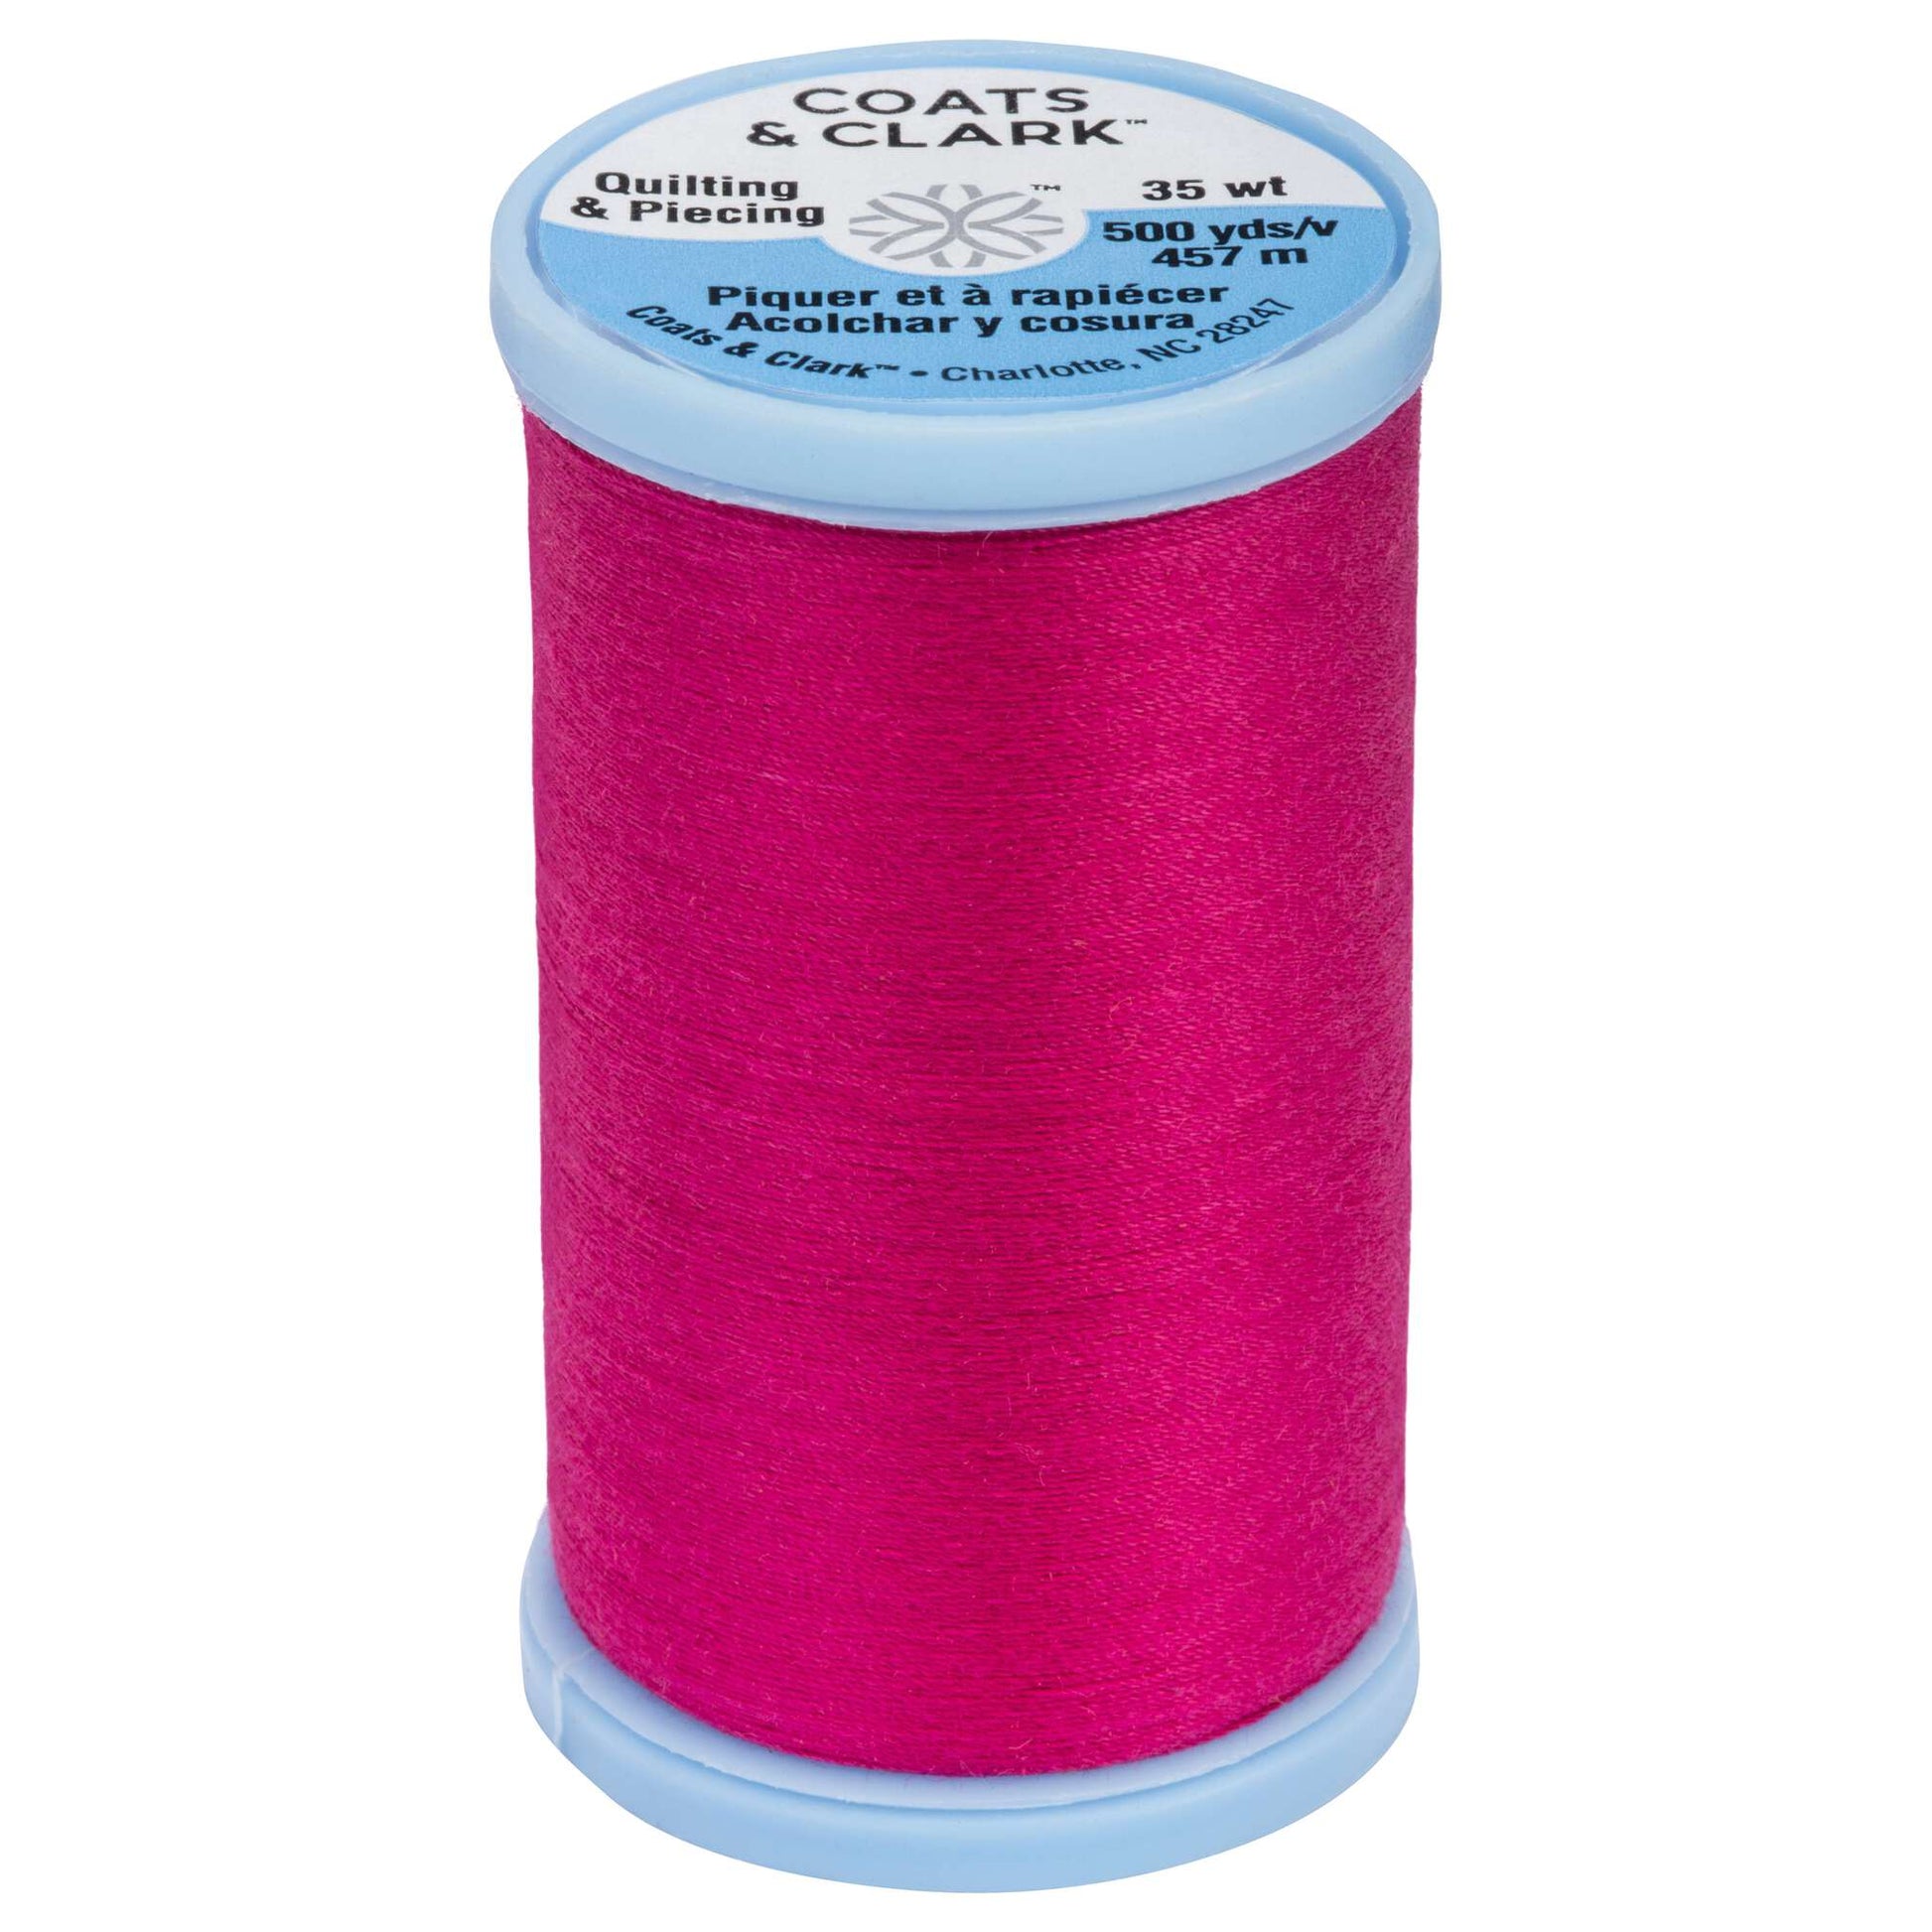 Coats & Clark Cotton Covered Quilting & Piecing Thread (500 Yards) Red Rose